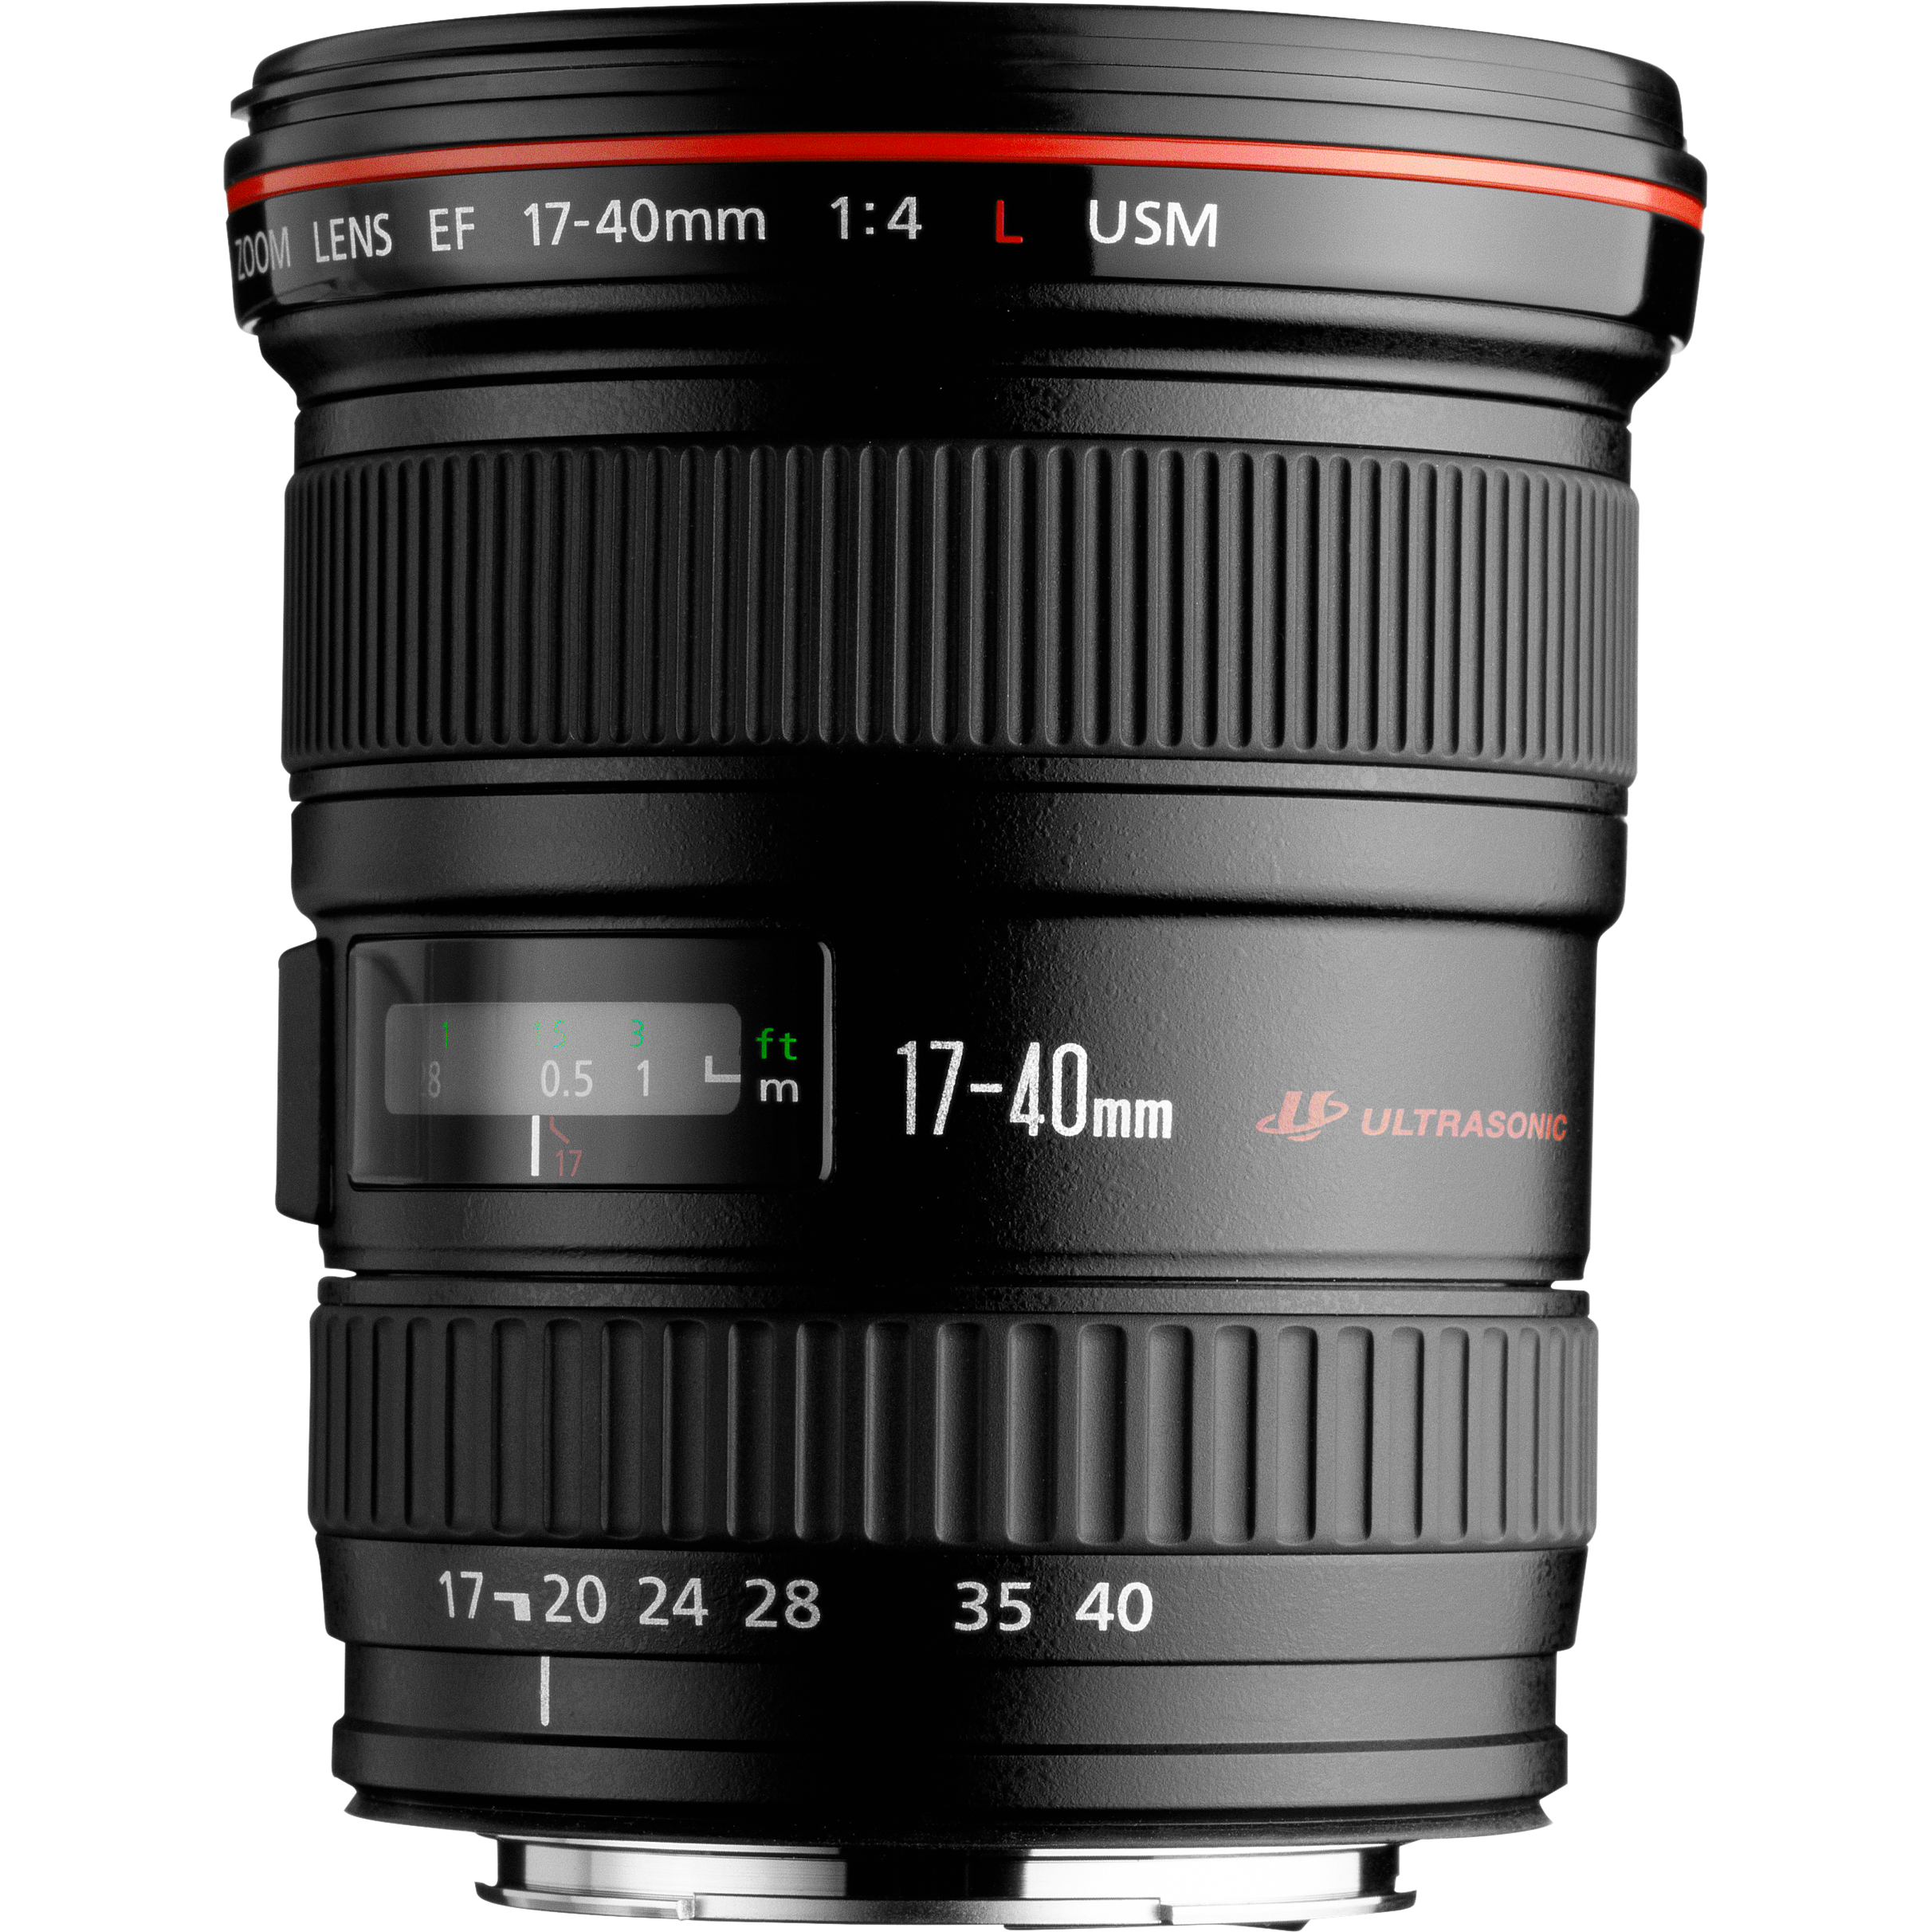 Buy Canon EF 17-40mm f/4L USM Lens in Discontinued — Canon UK Store